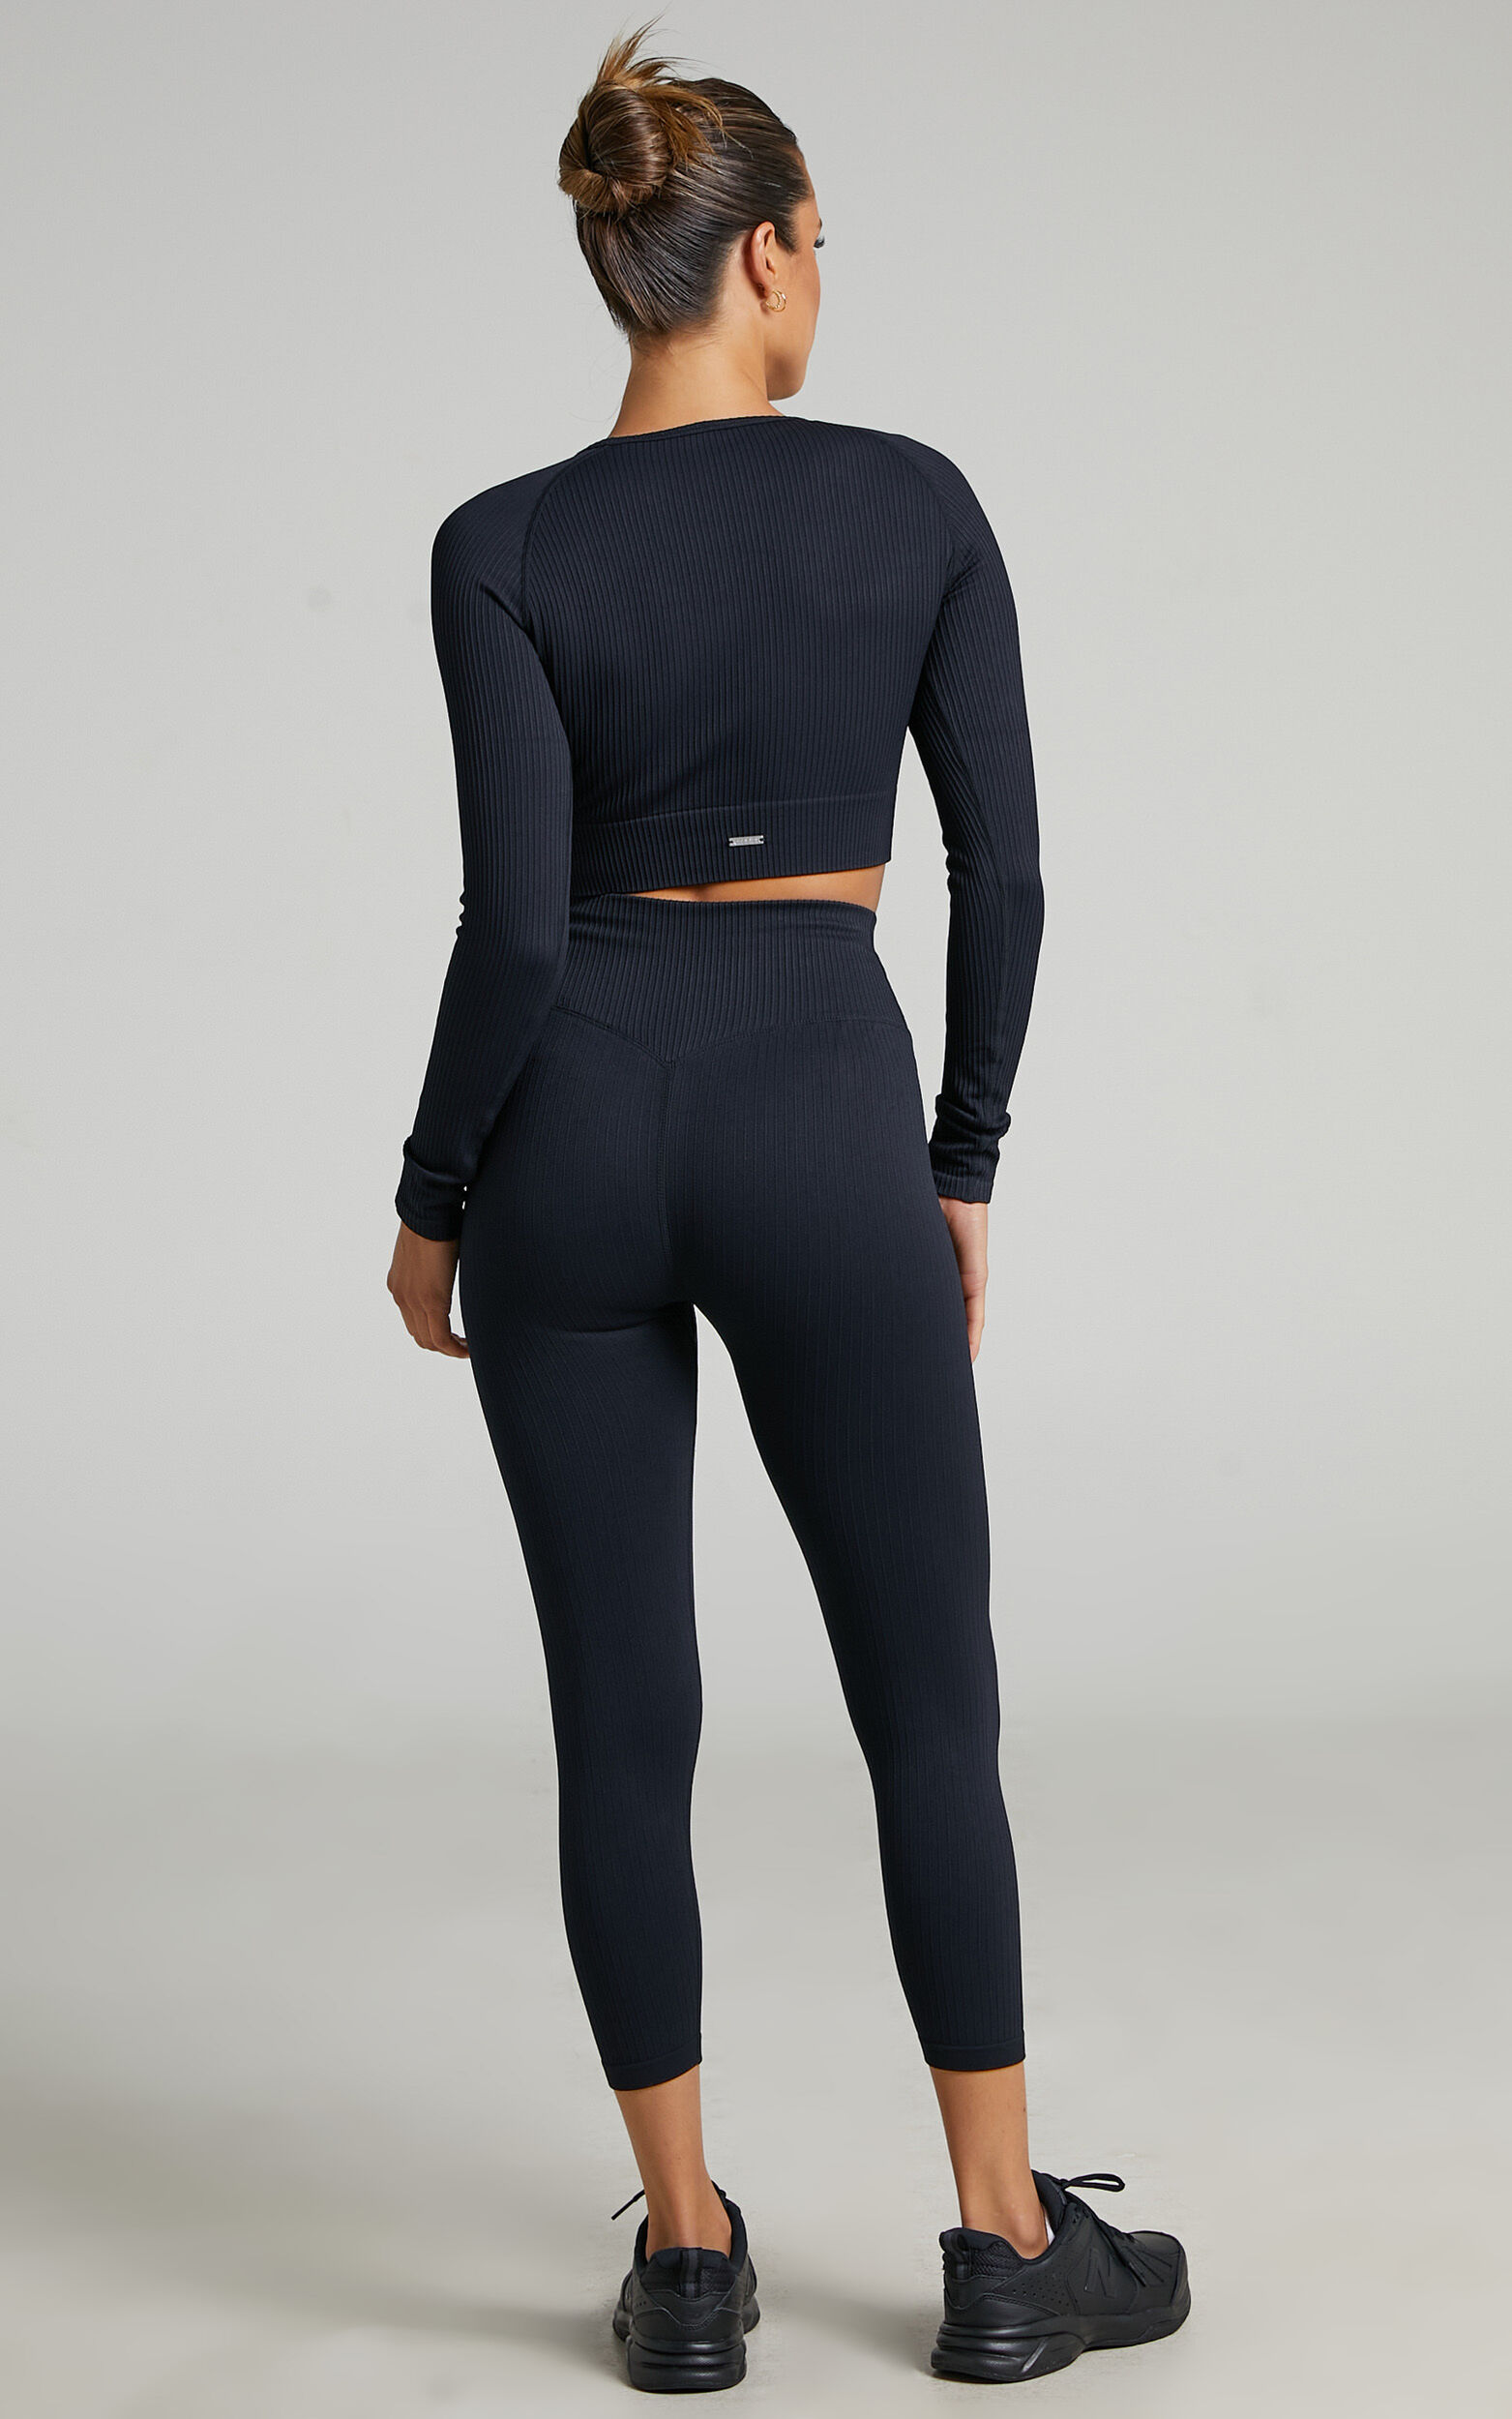 Seamless tights - buy aim'n seamless tights online